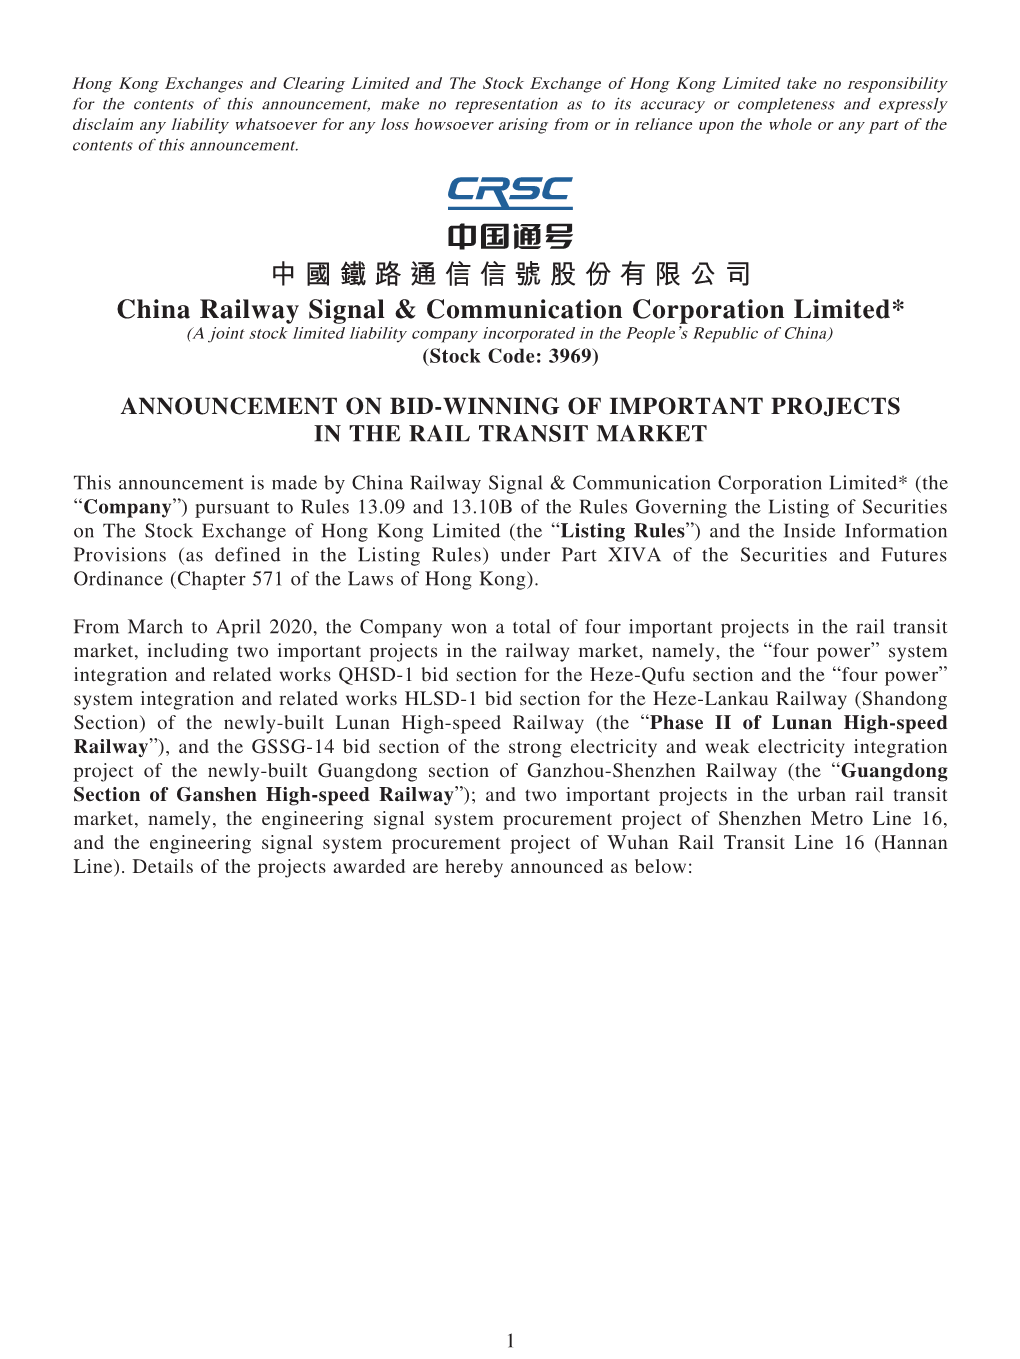 Announcement on Bid-Winning of Important Projects in the Rail Transit Market